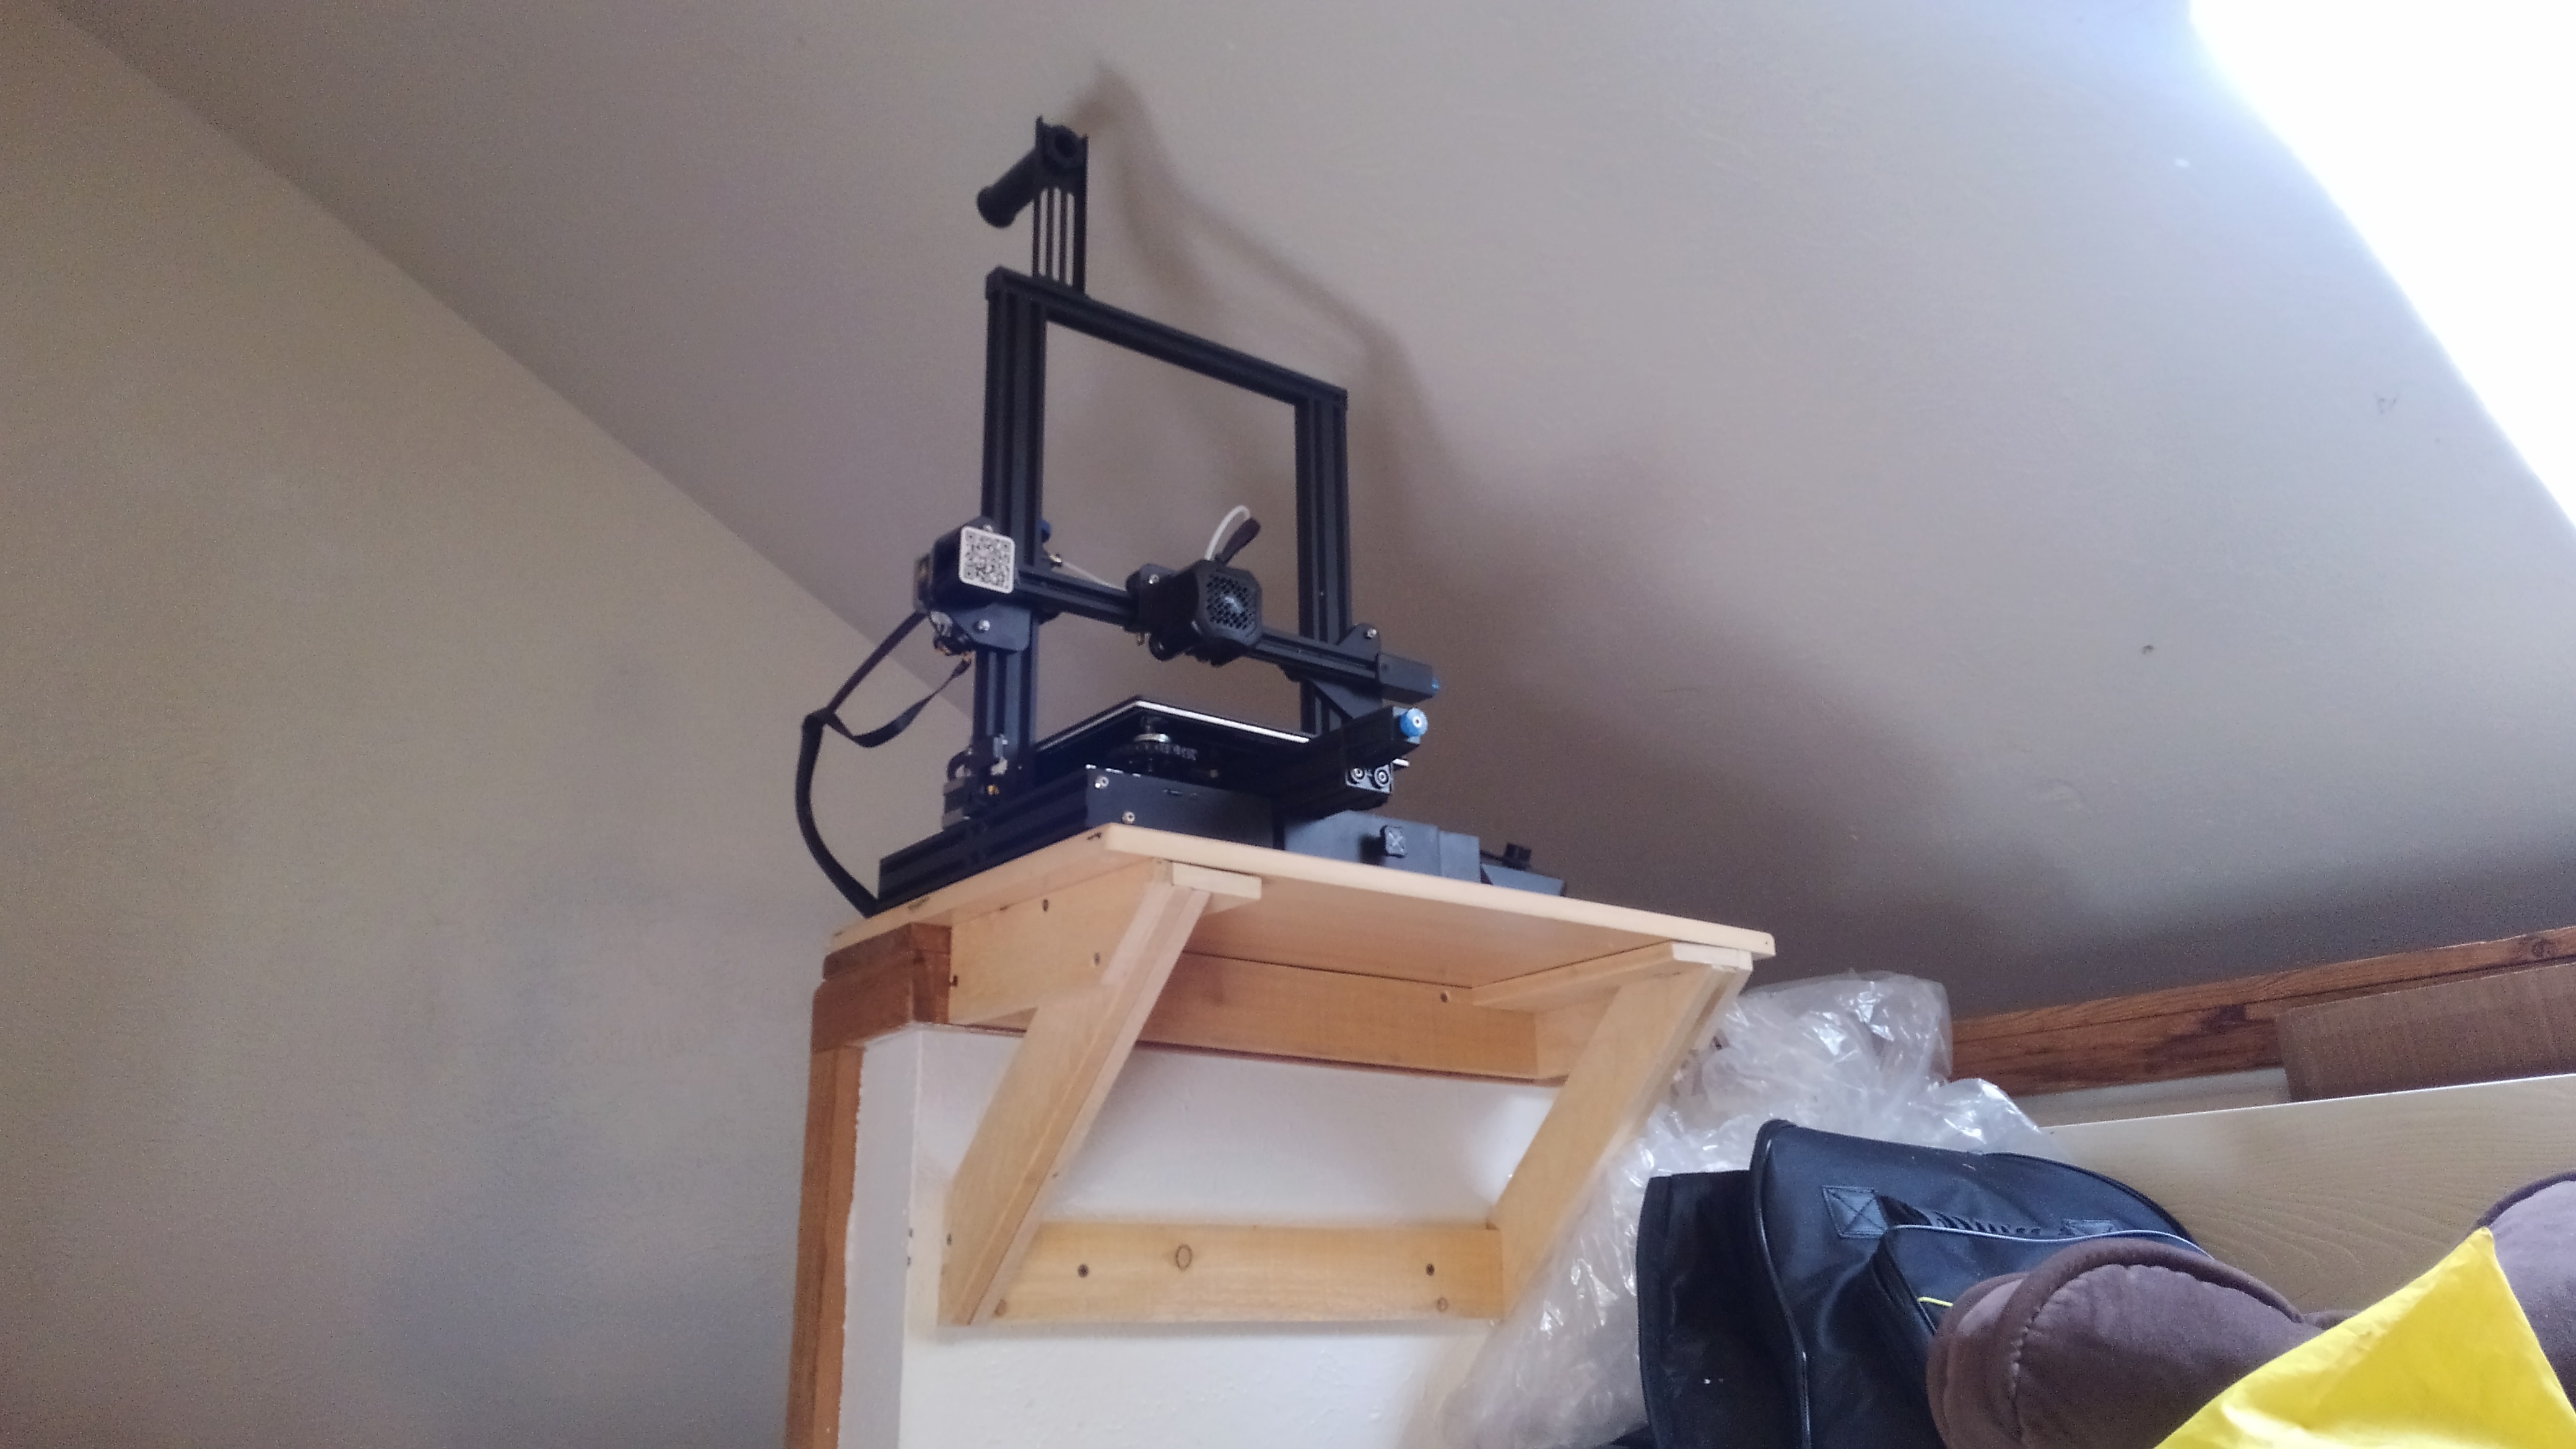 A triangle frame shelf holding a 3D printer. It is attached to a low wall.